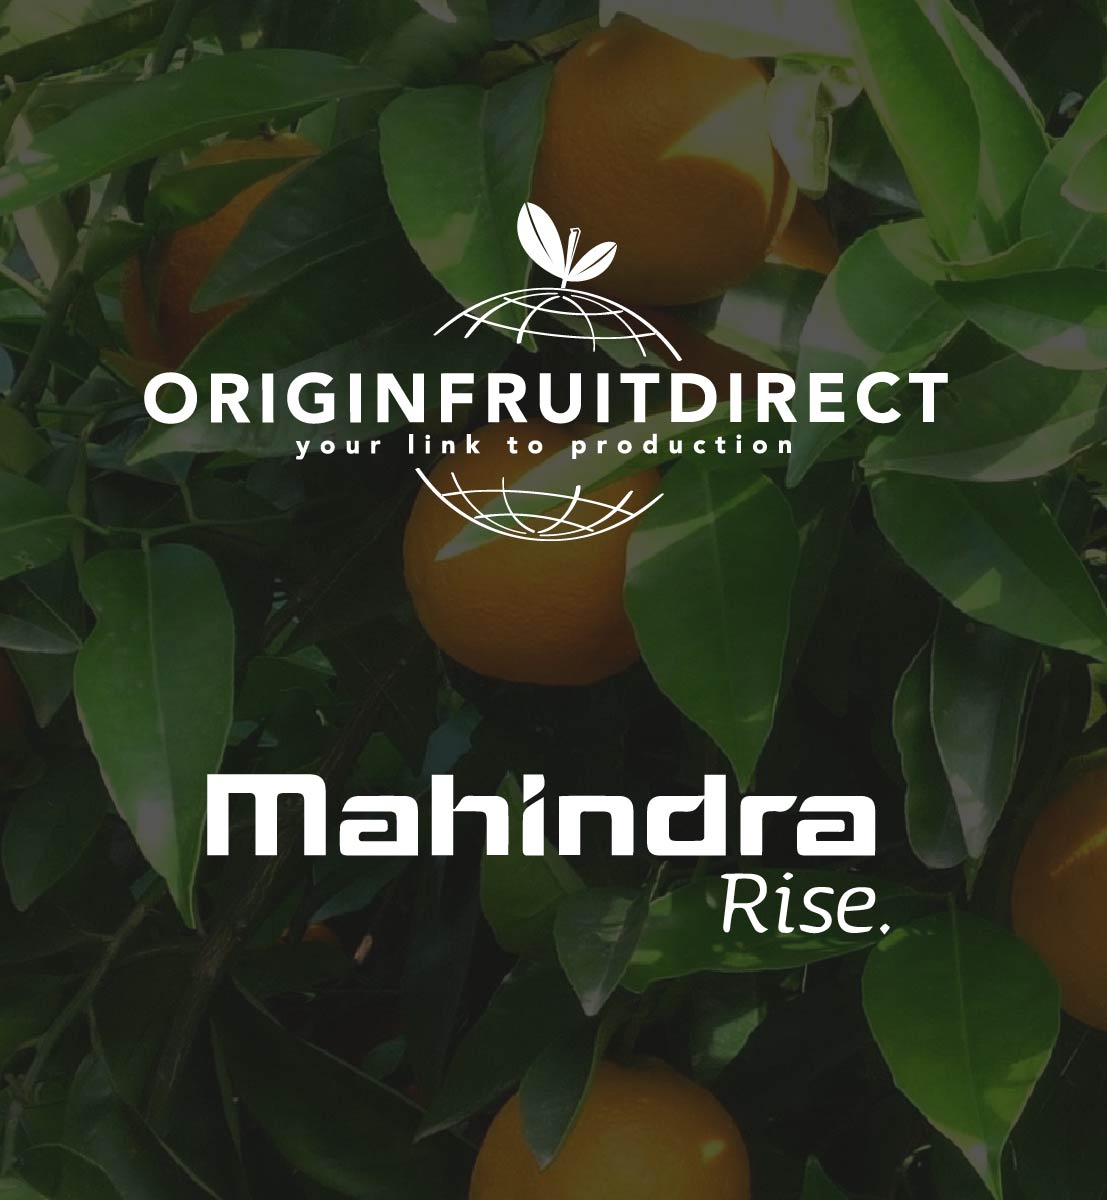 DEX international M&A advised Origin Fruit Direct in the management buy-out from Mahindra